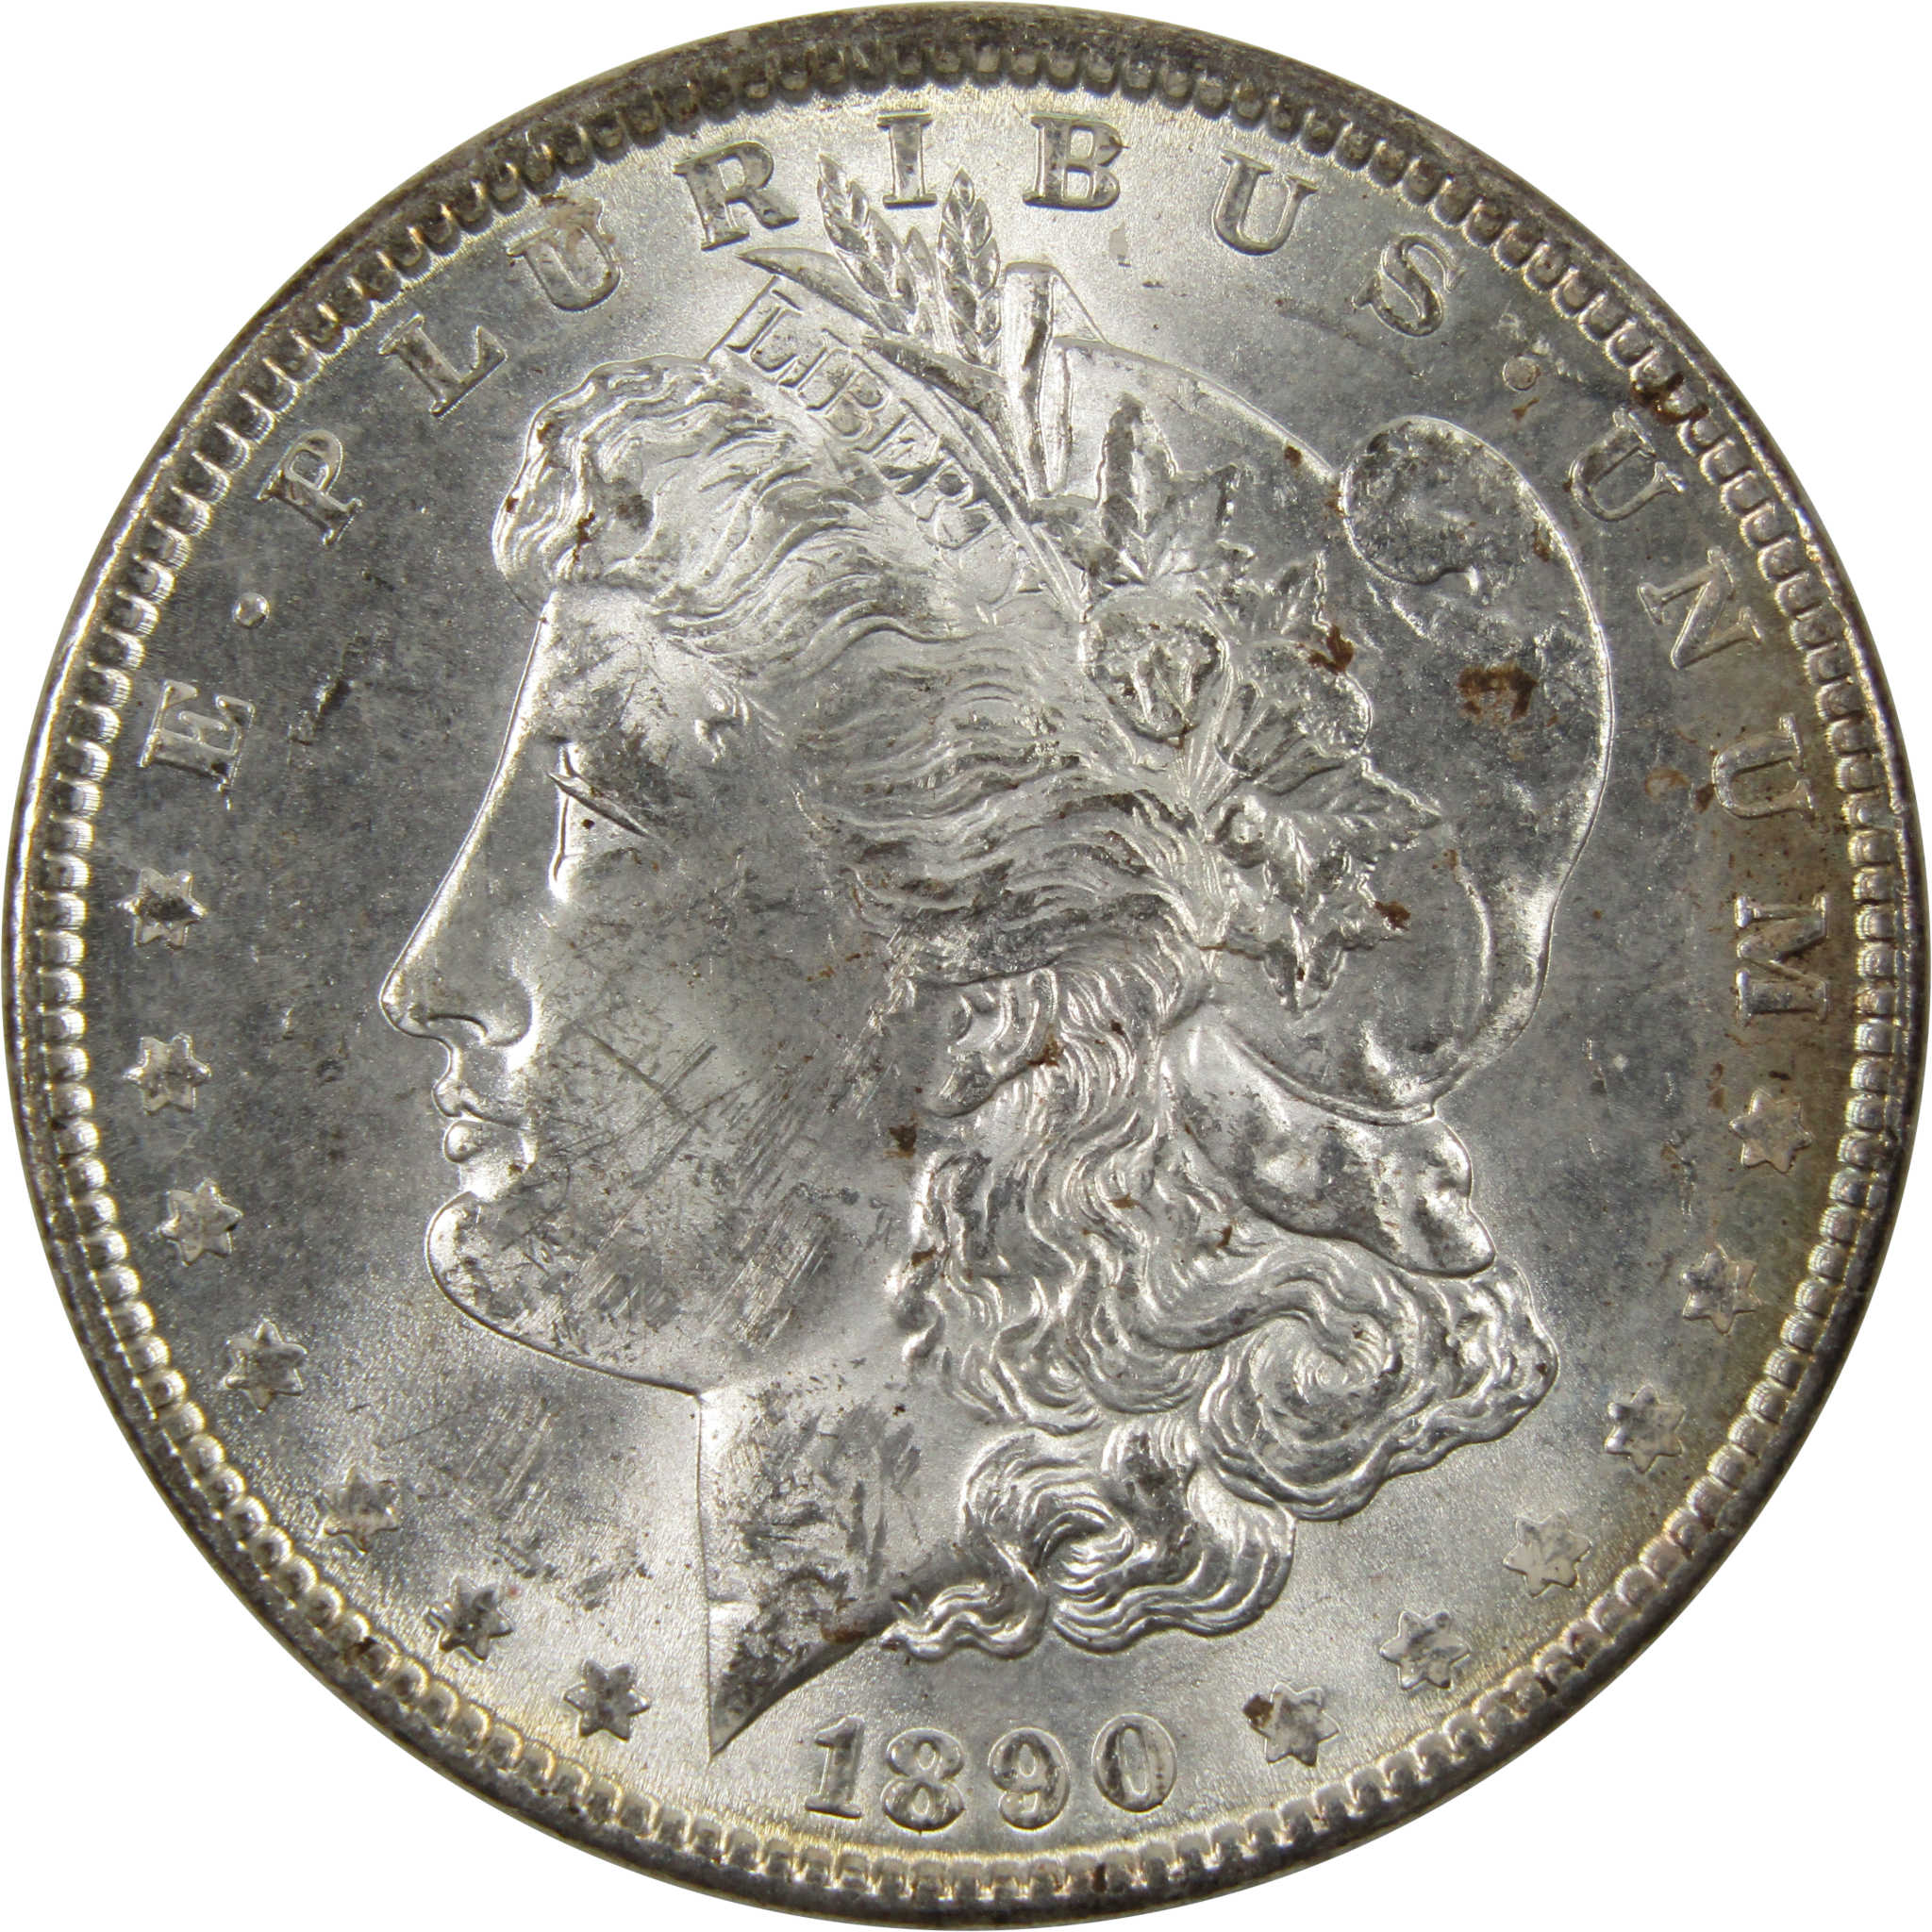 1890 Morgan Dollar Uncirculated Details 90% Silver $1 Coin SKU:I9878 - Morgan coin - Morgan silver dollar - Morgan silver dollar for sale - Profile Coins &amp; Collectibles